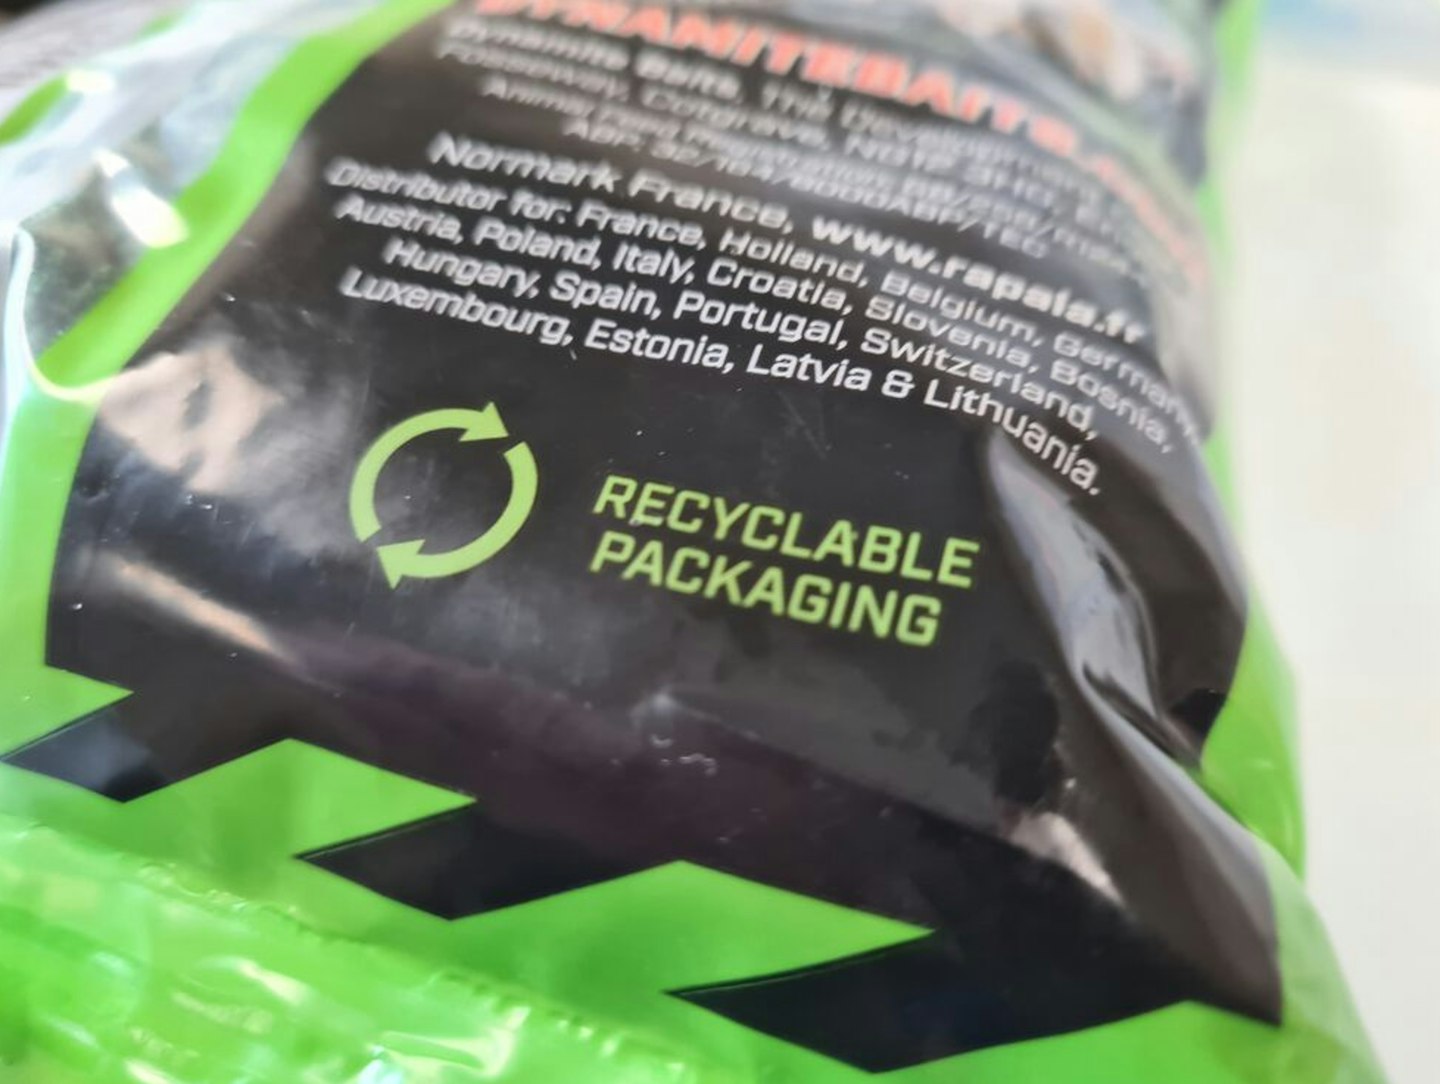 Fully recyclable bait packaging